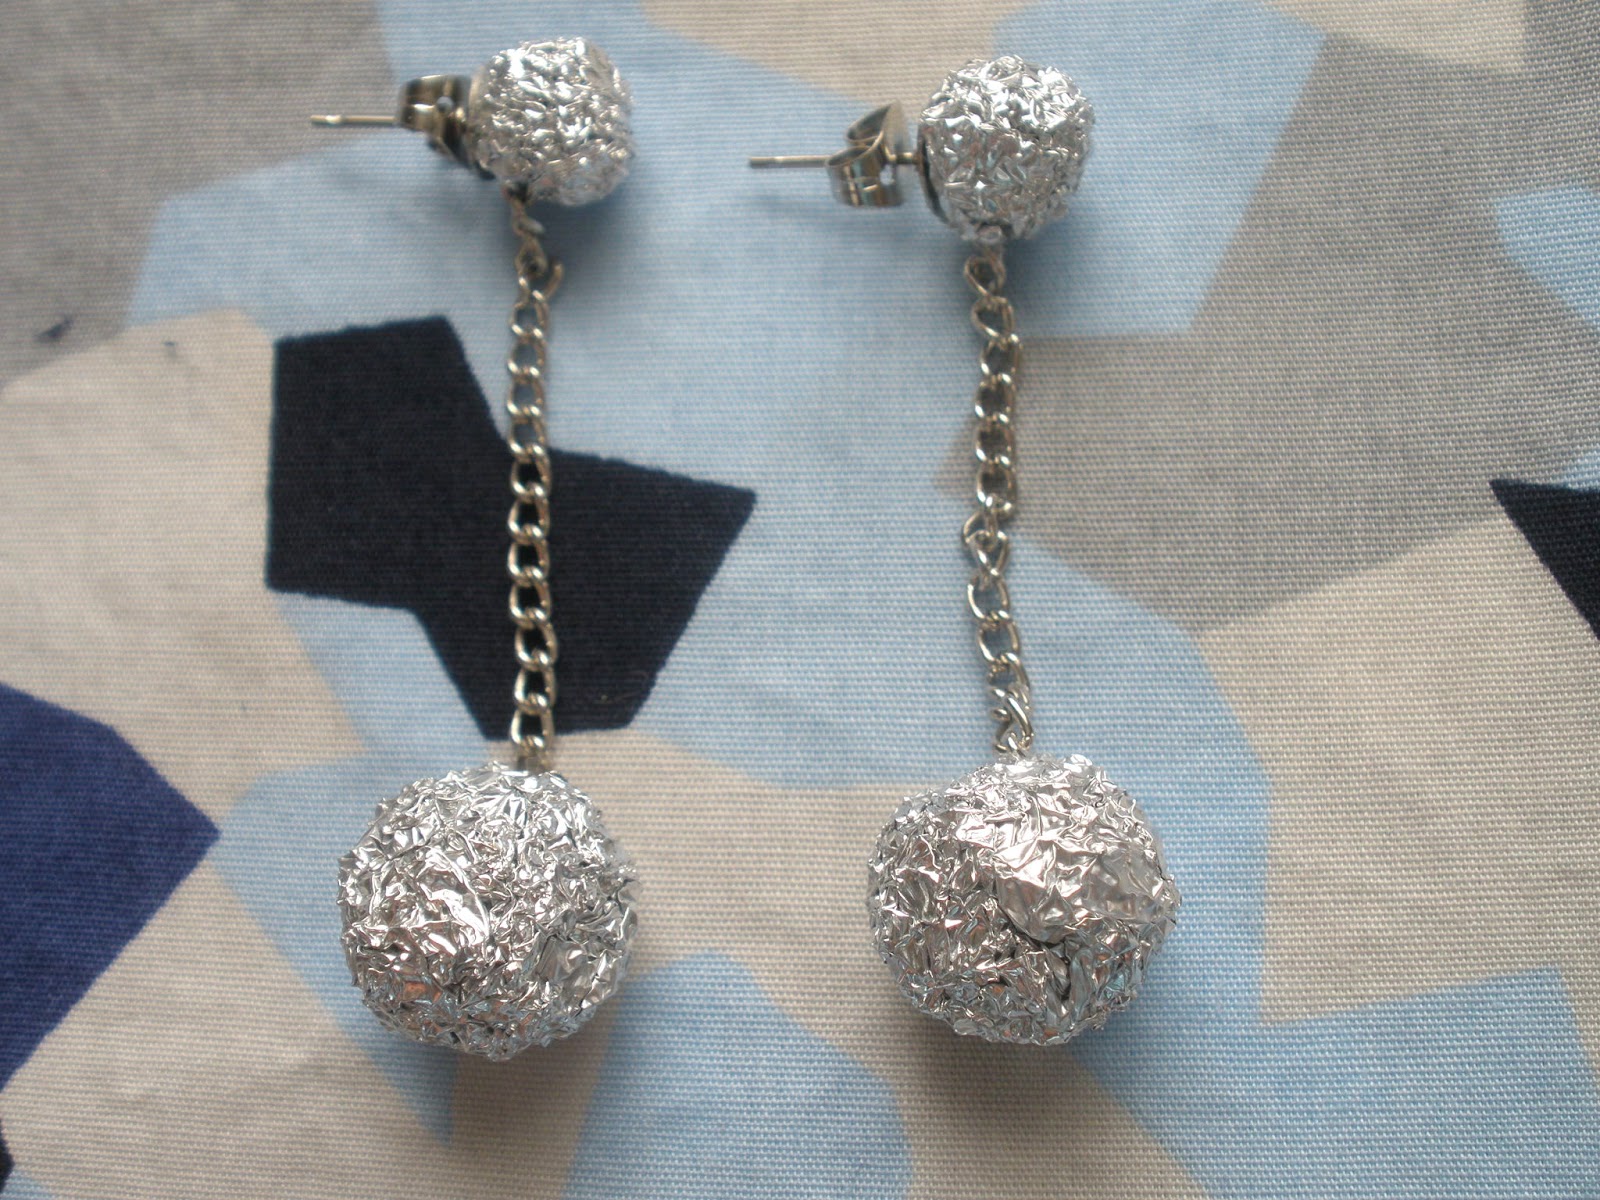 handmade by stacy vaughn: tin foil earings